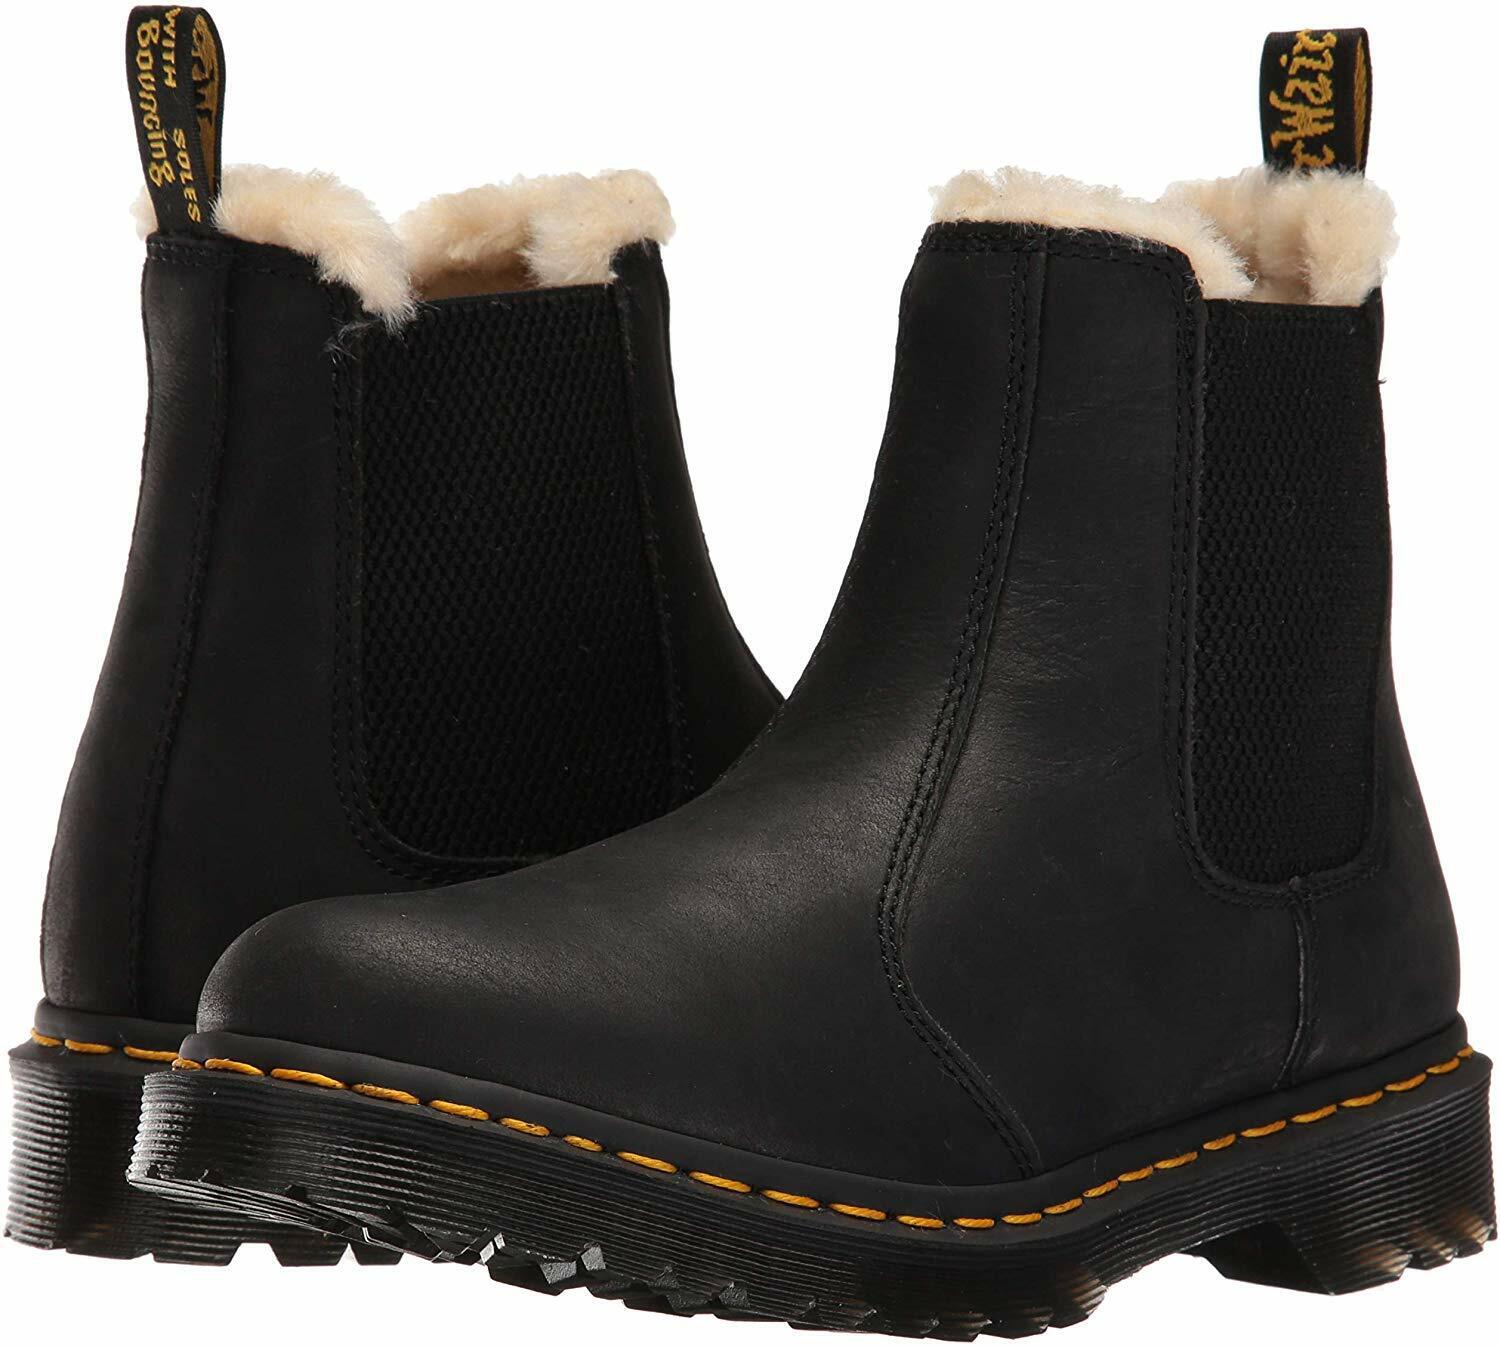 Women's Super special price Shoes Dr. Martens 2976 Boots store 210 LEONORE Leather Chelsea